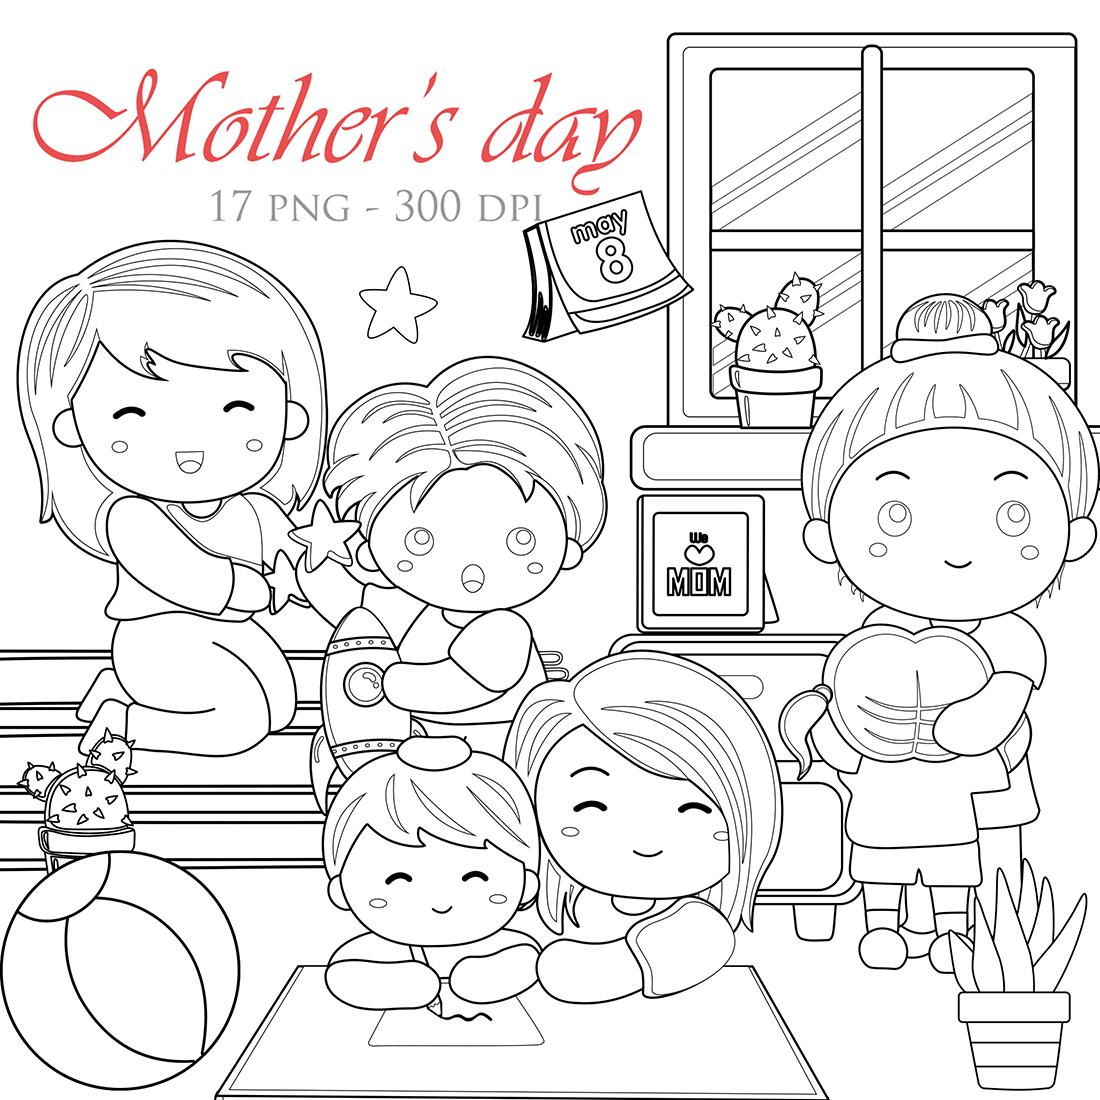 Mother's Day Activity at Home With Kids Boy and Girl With Love Digital Stamp Outline cover image.